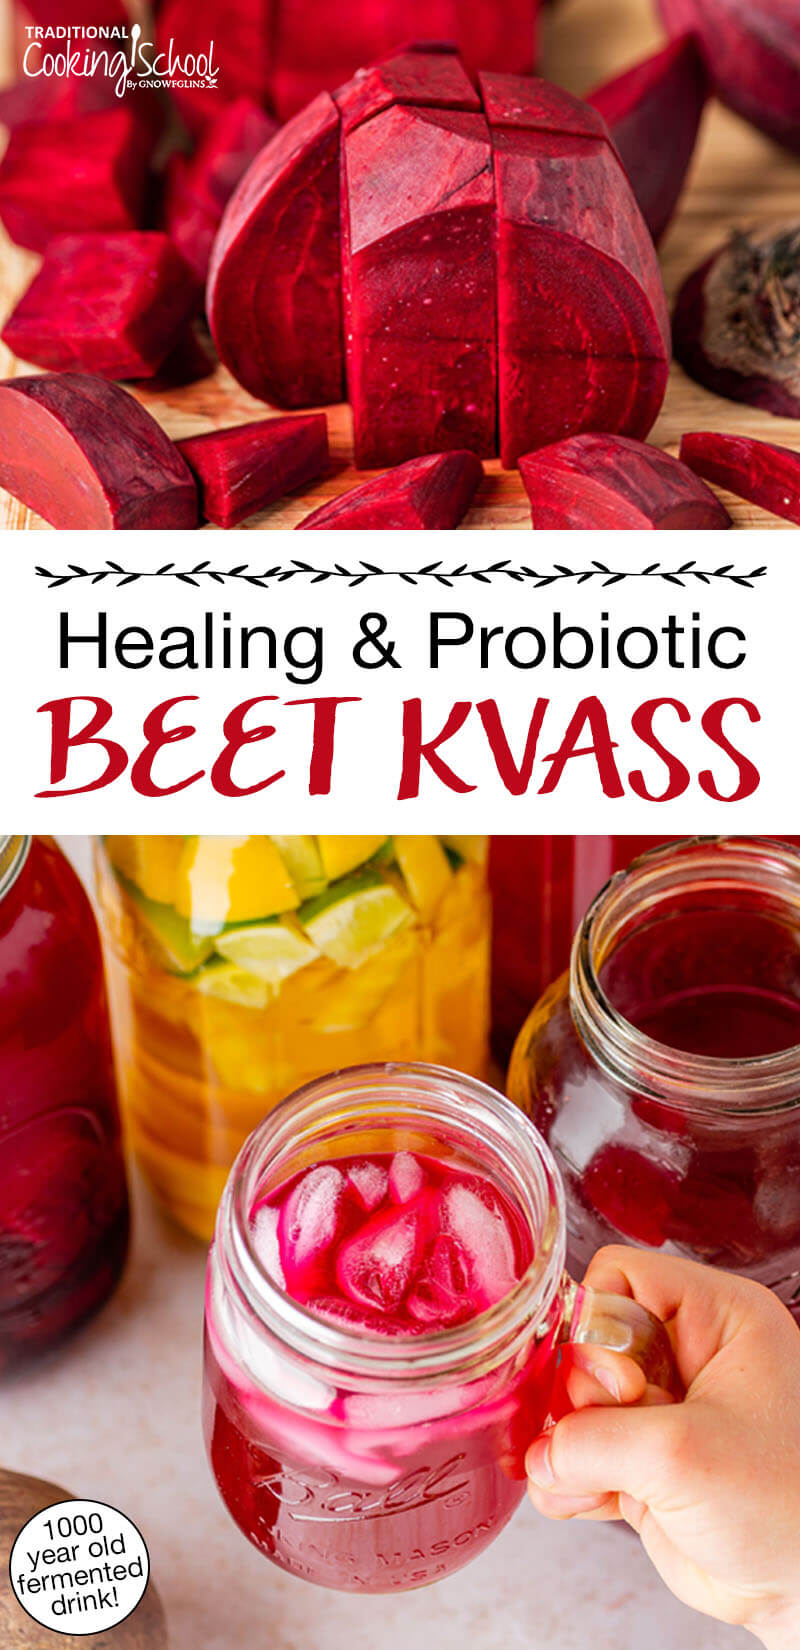 Photo collage of beets and beet kvass in a glass jar with ice. Text overlay says: "Healing & Probiotic Beet Kvass (1000 year old fermented drink!)"